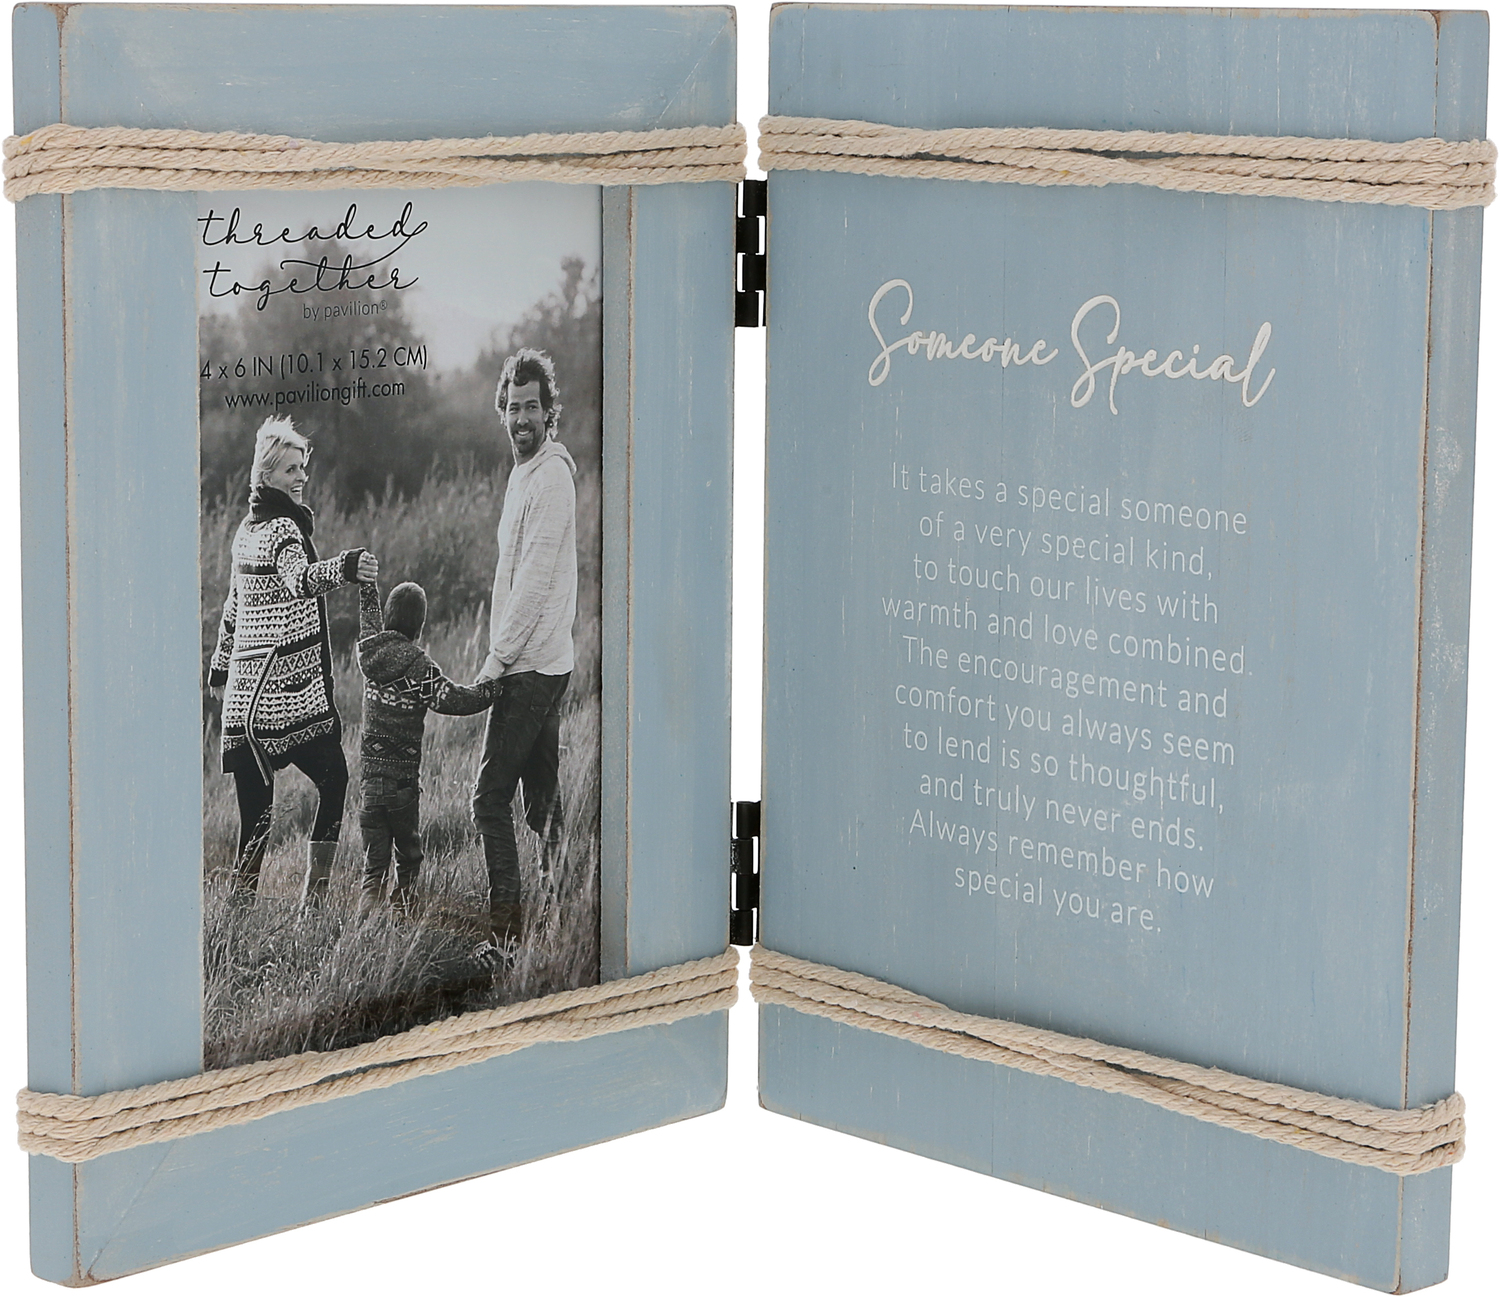 Someone Special by Threaded Together - Someone Special - 5.5" x 7.5" Hinged Sentiment Frame (Holds 4" x 6" Photo)